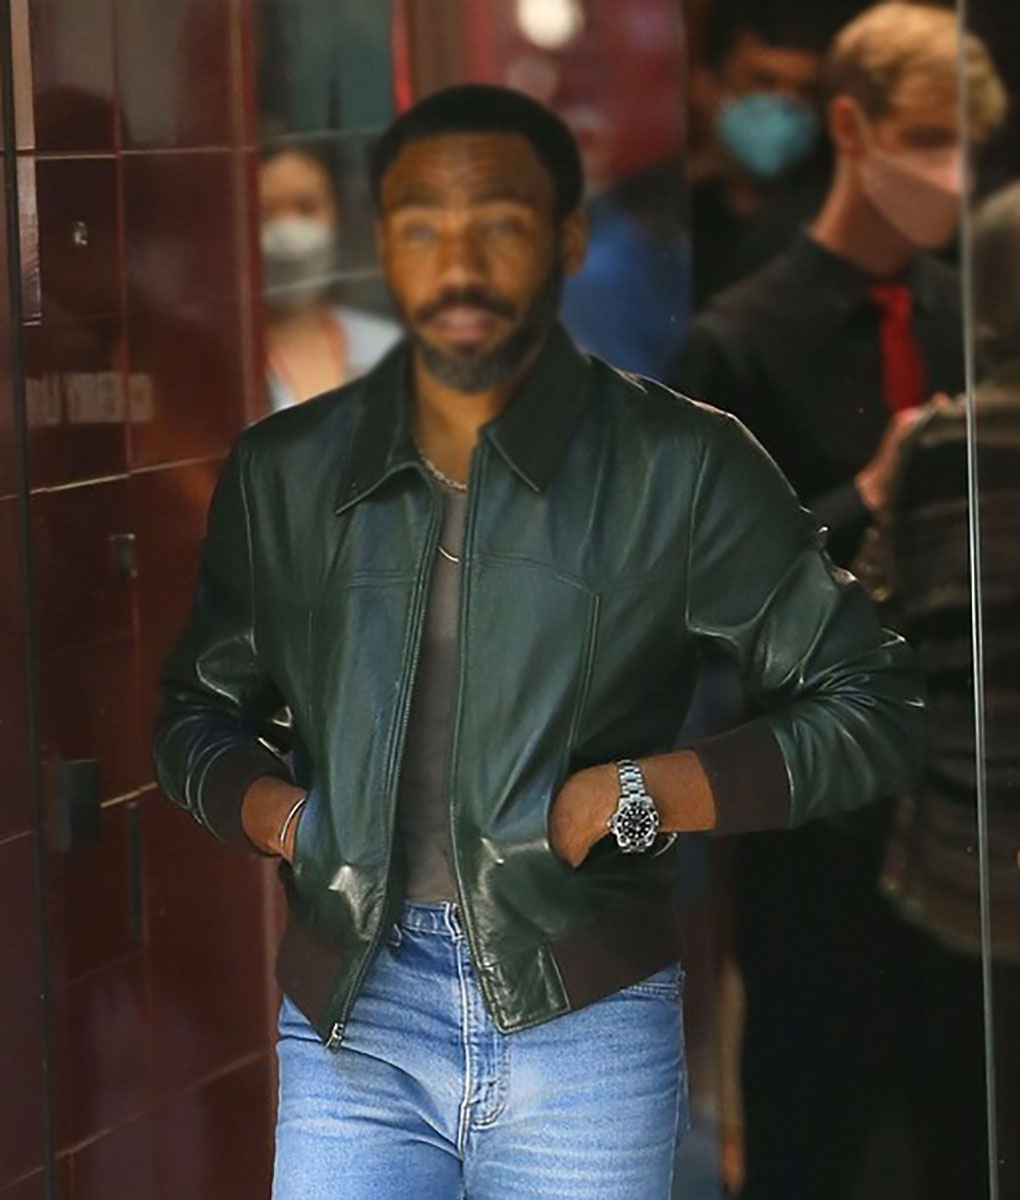 Muscles On Mrs Smith Donald Glover Green Jacket